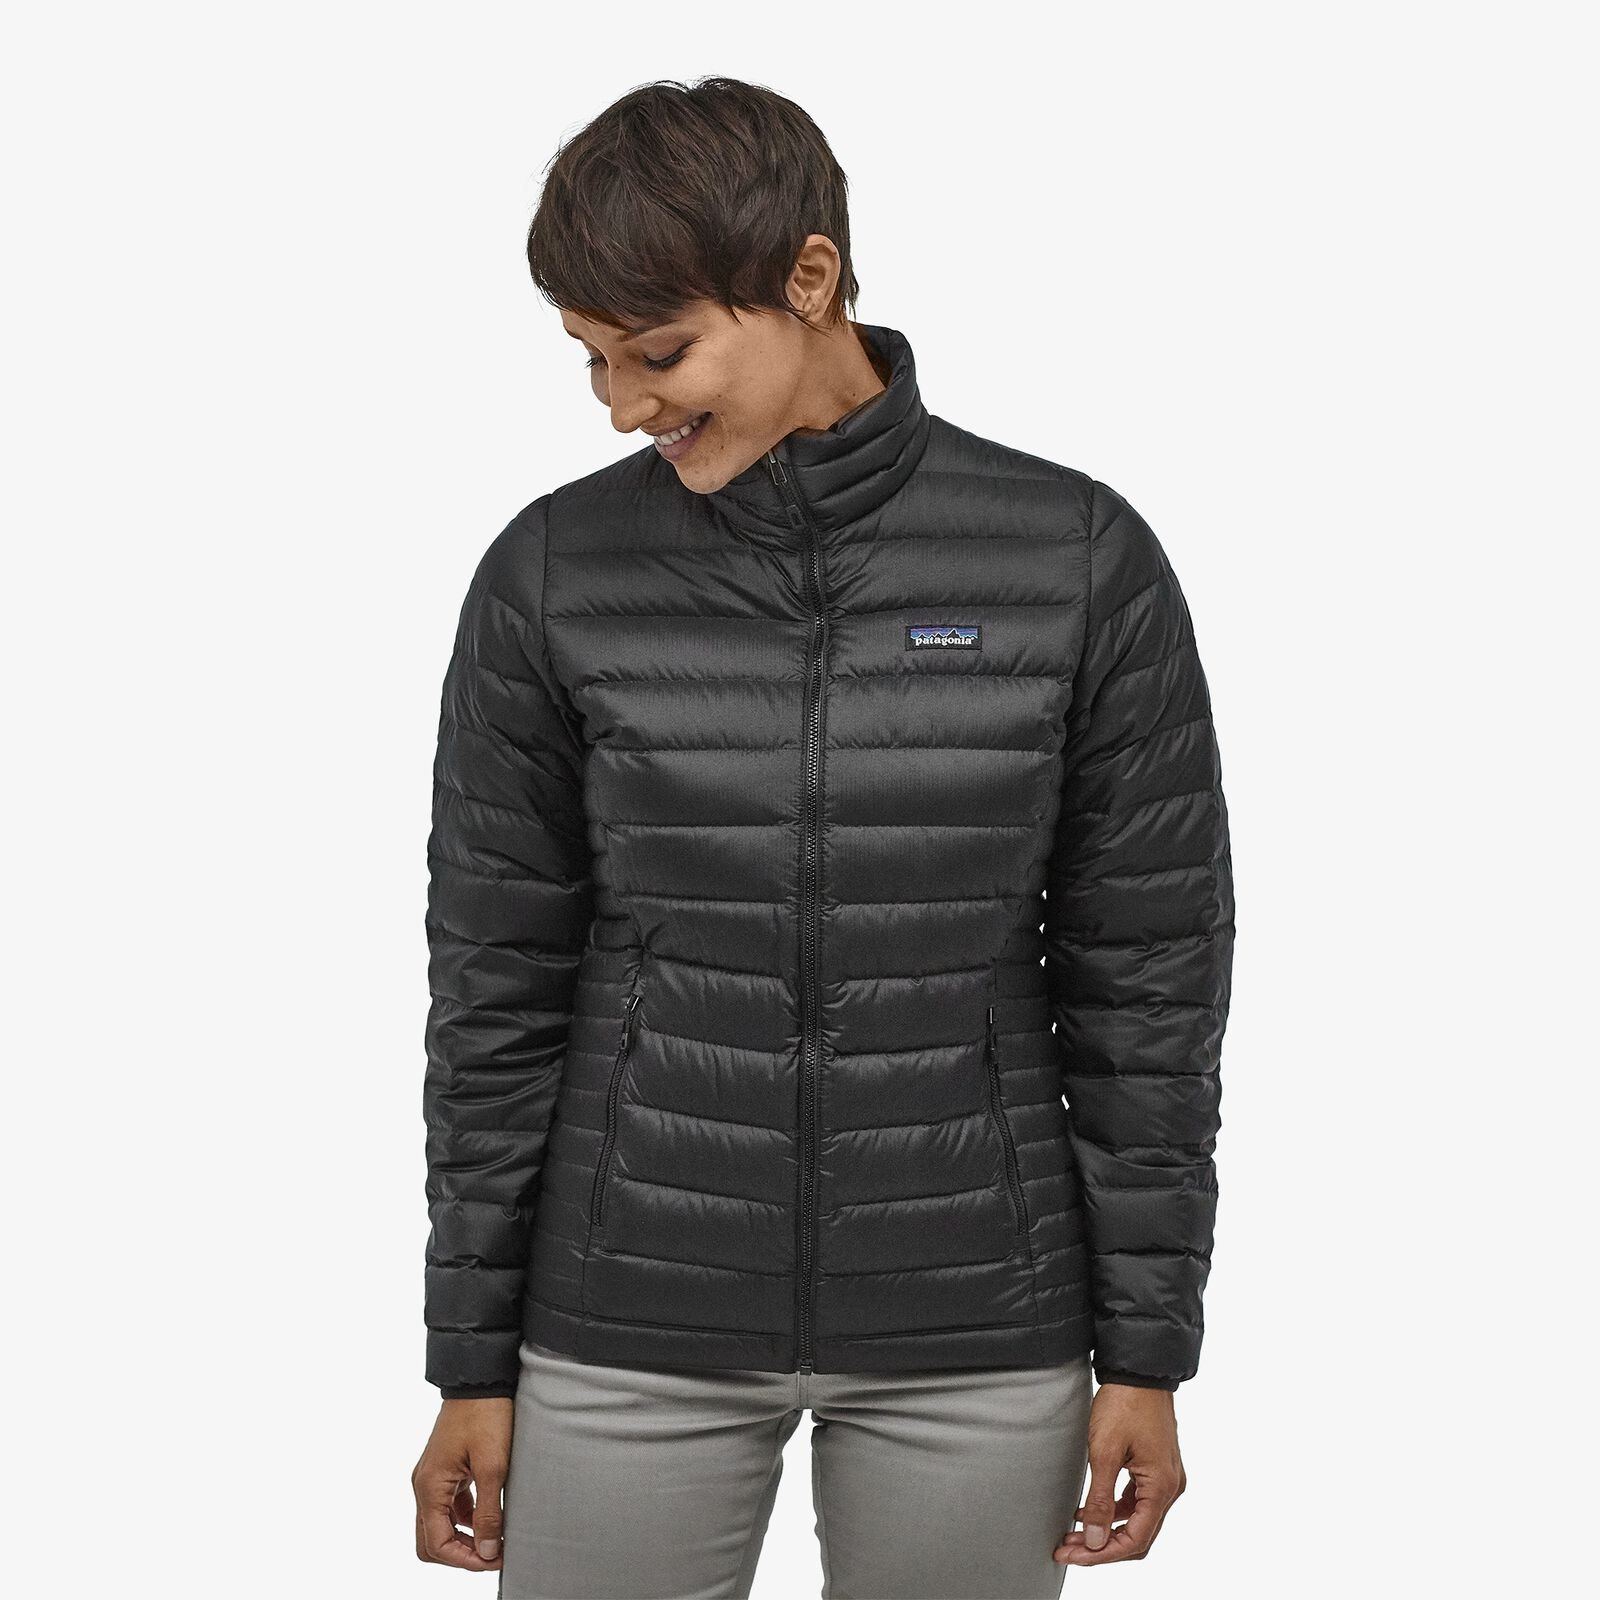 Patagonia Women's Down Sweater Jacket - Sustainable Down, Black / XS